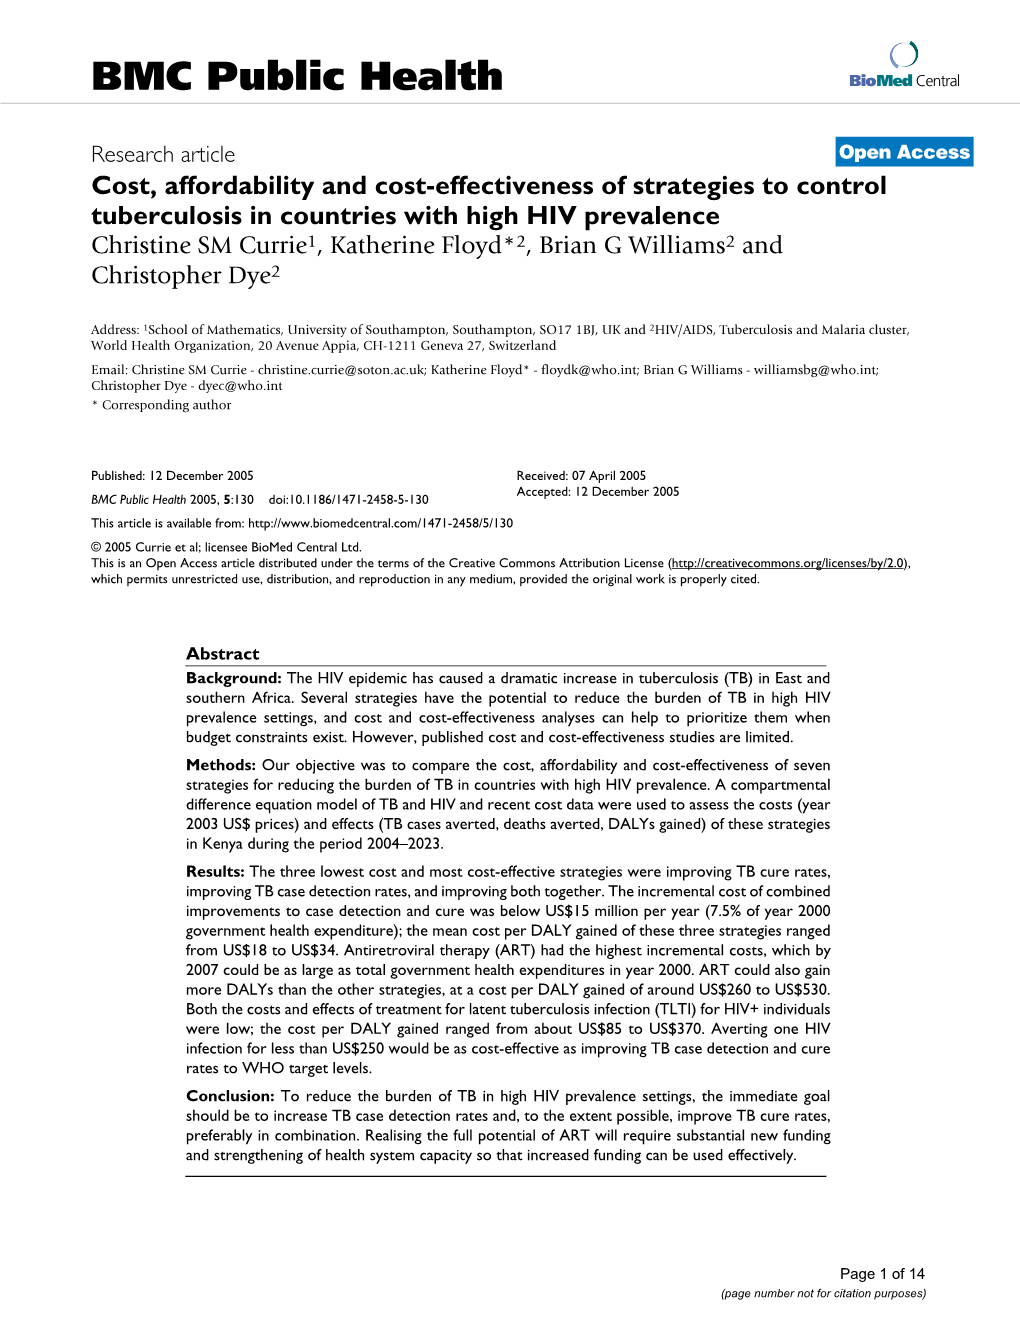 Cost, Affordability and Cost-Effectiveness of Strategies To